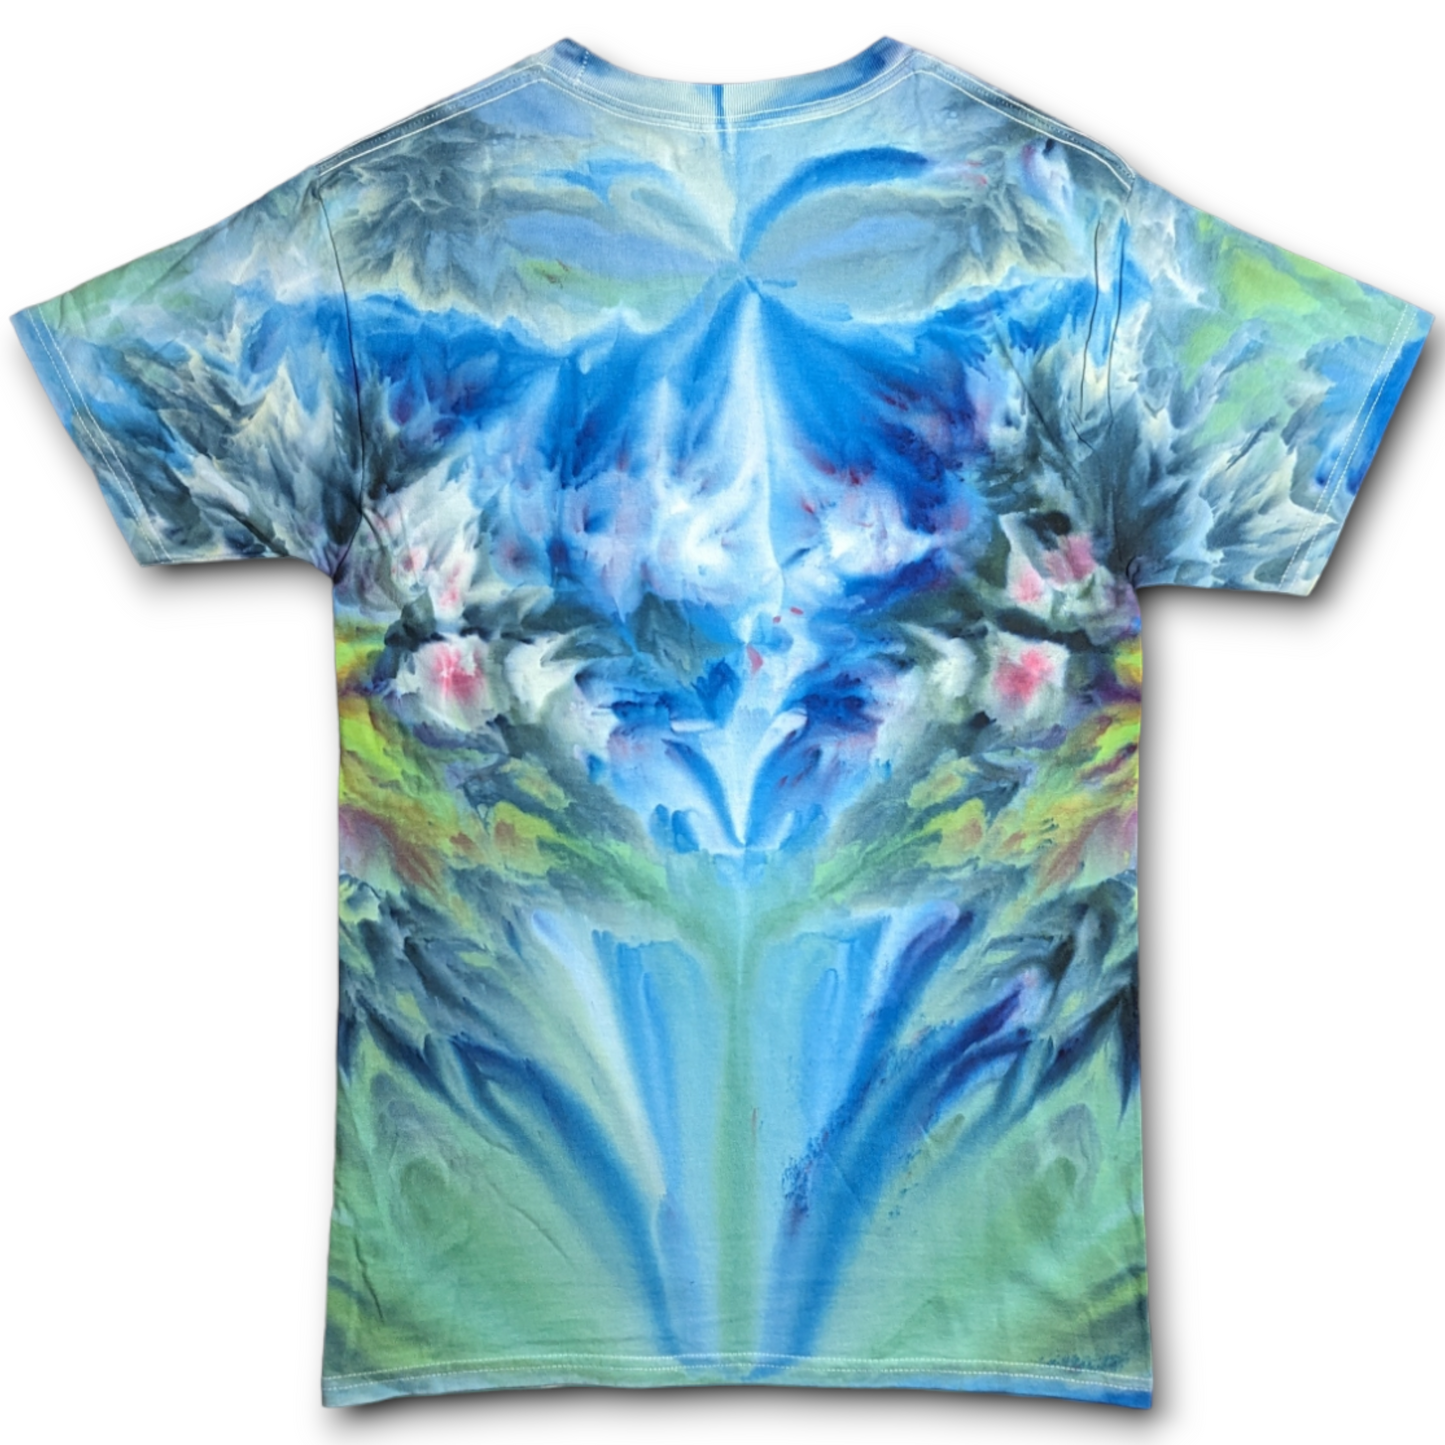 Boognish Melting Limited Run Ween Ice Dyed Shirt for 2023 - Small – Ice  Cold Dyes